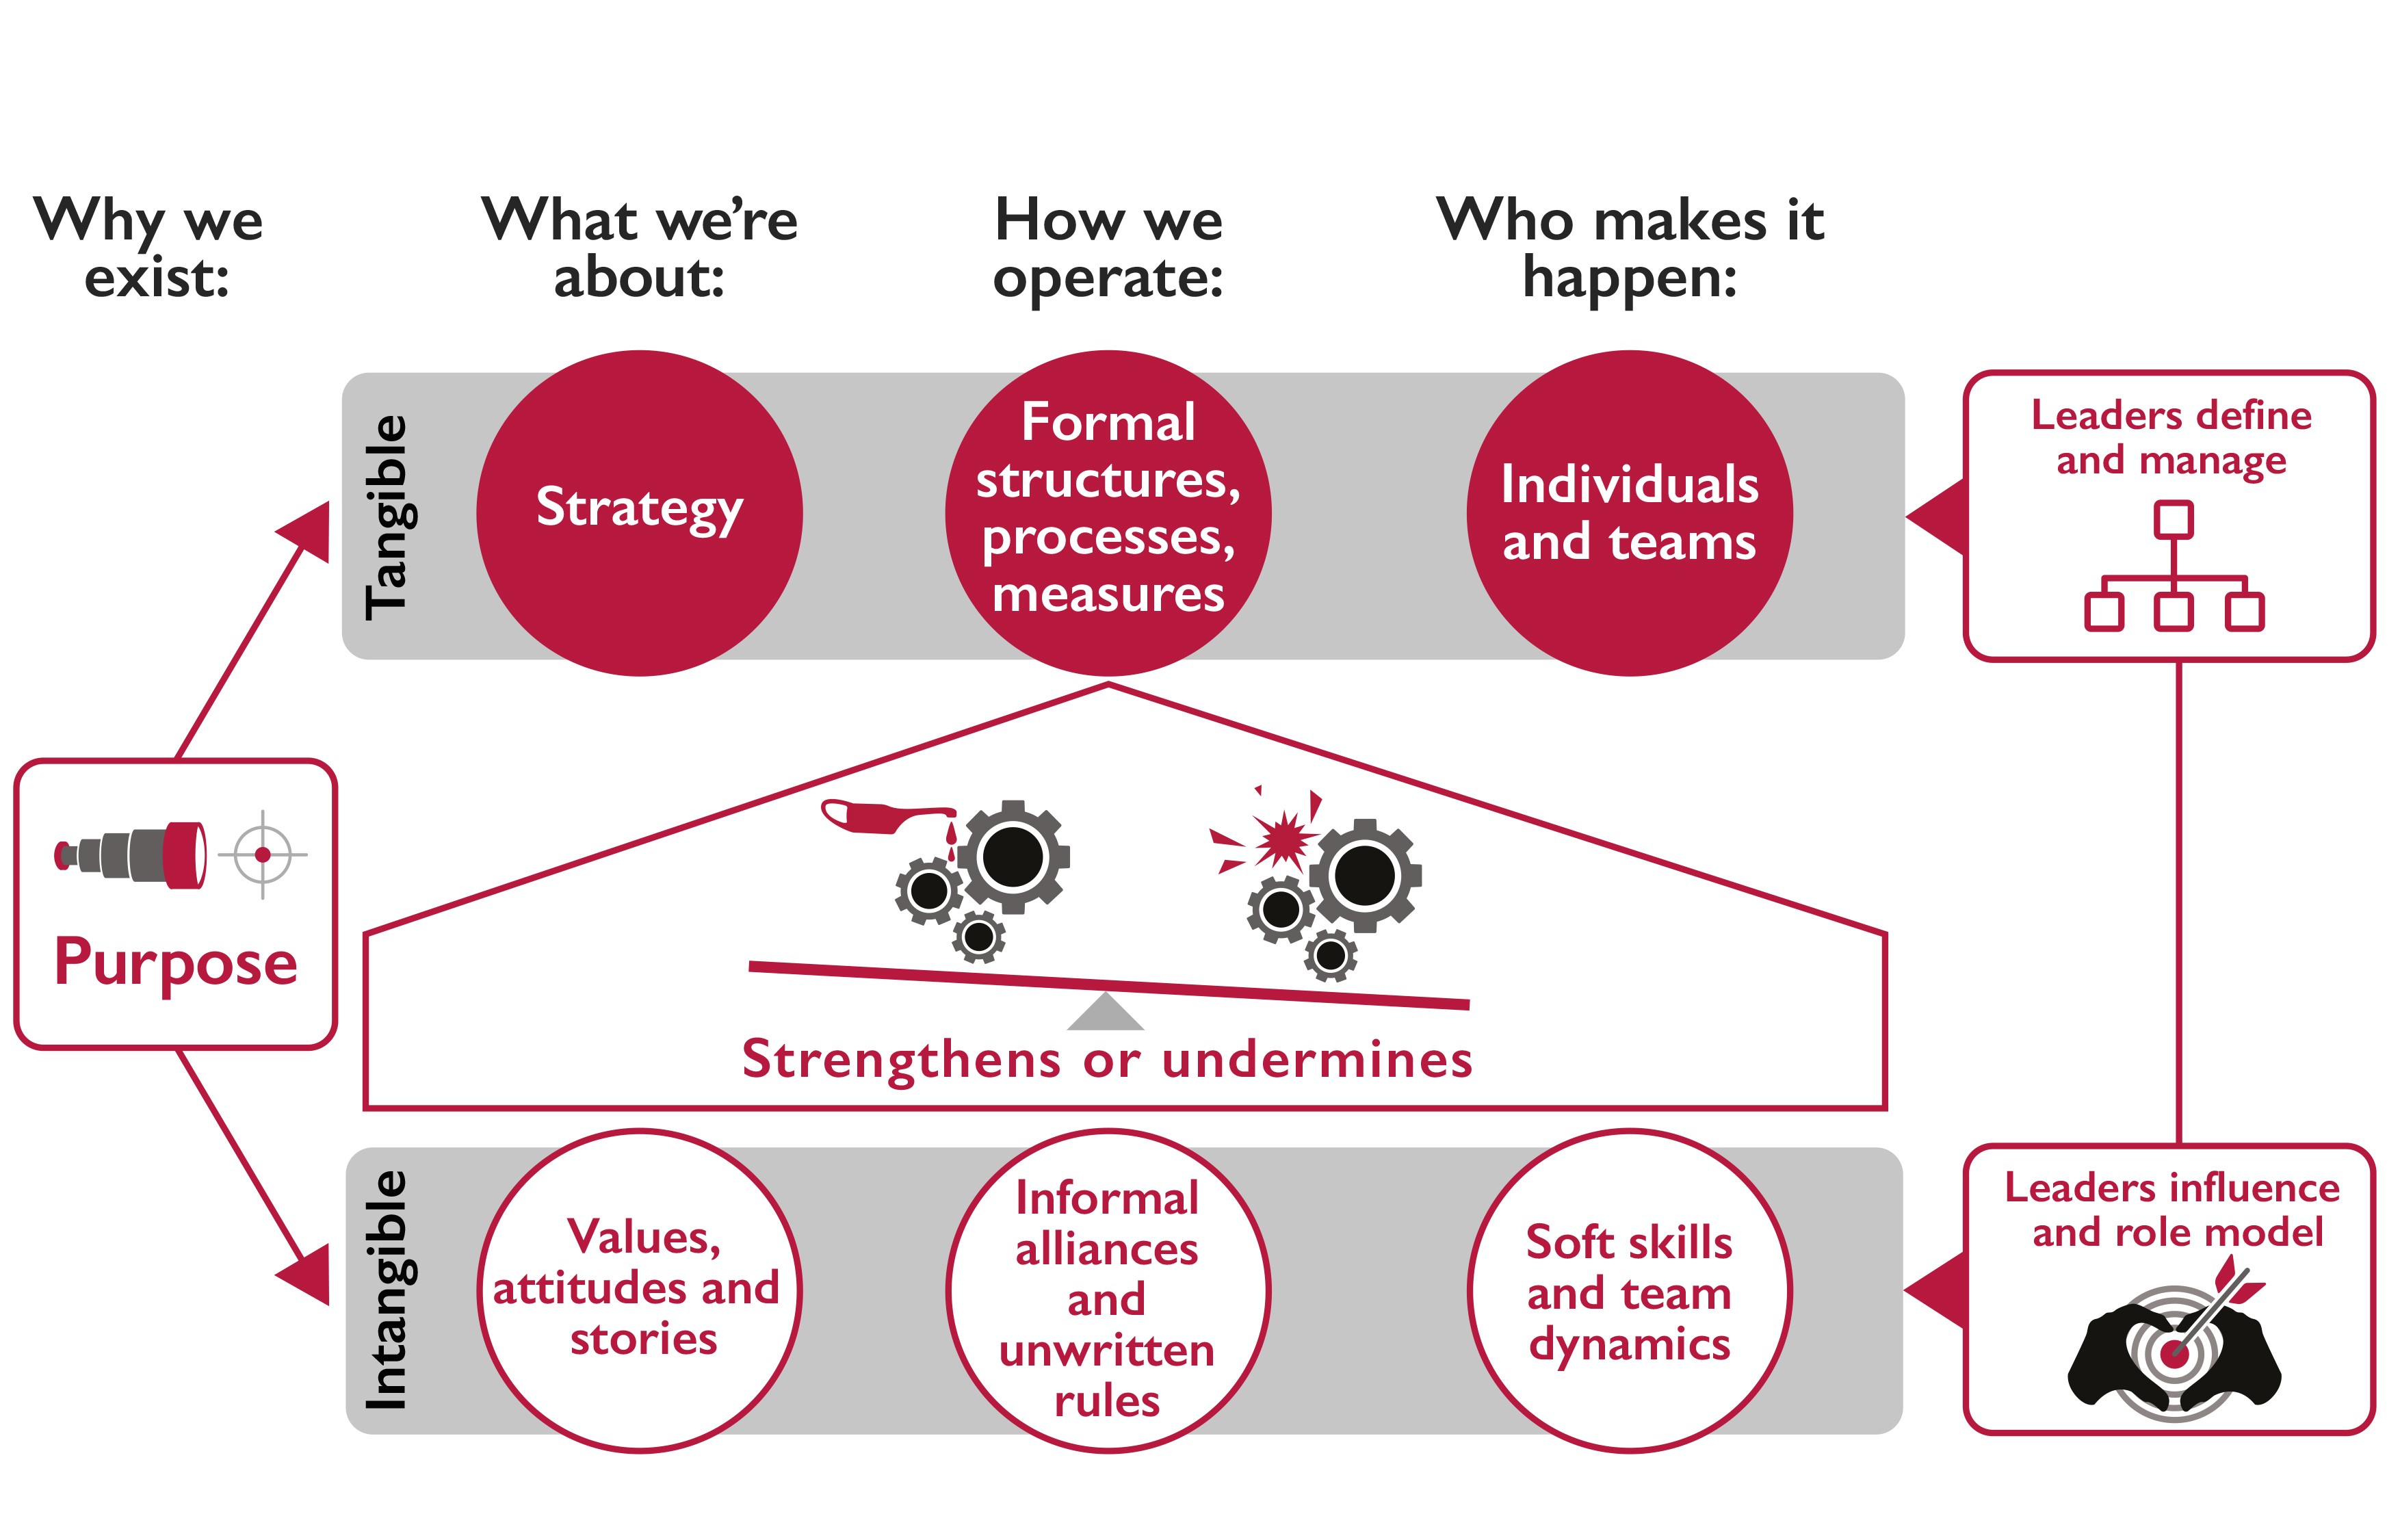 The Berkeley Partnership's graphic showing a framework for maximising organisational effectiveness through focusing on both tangible and intangible elements